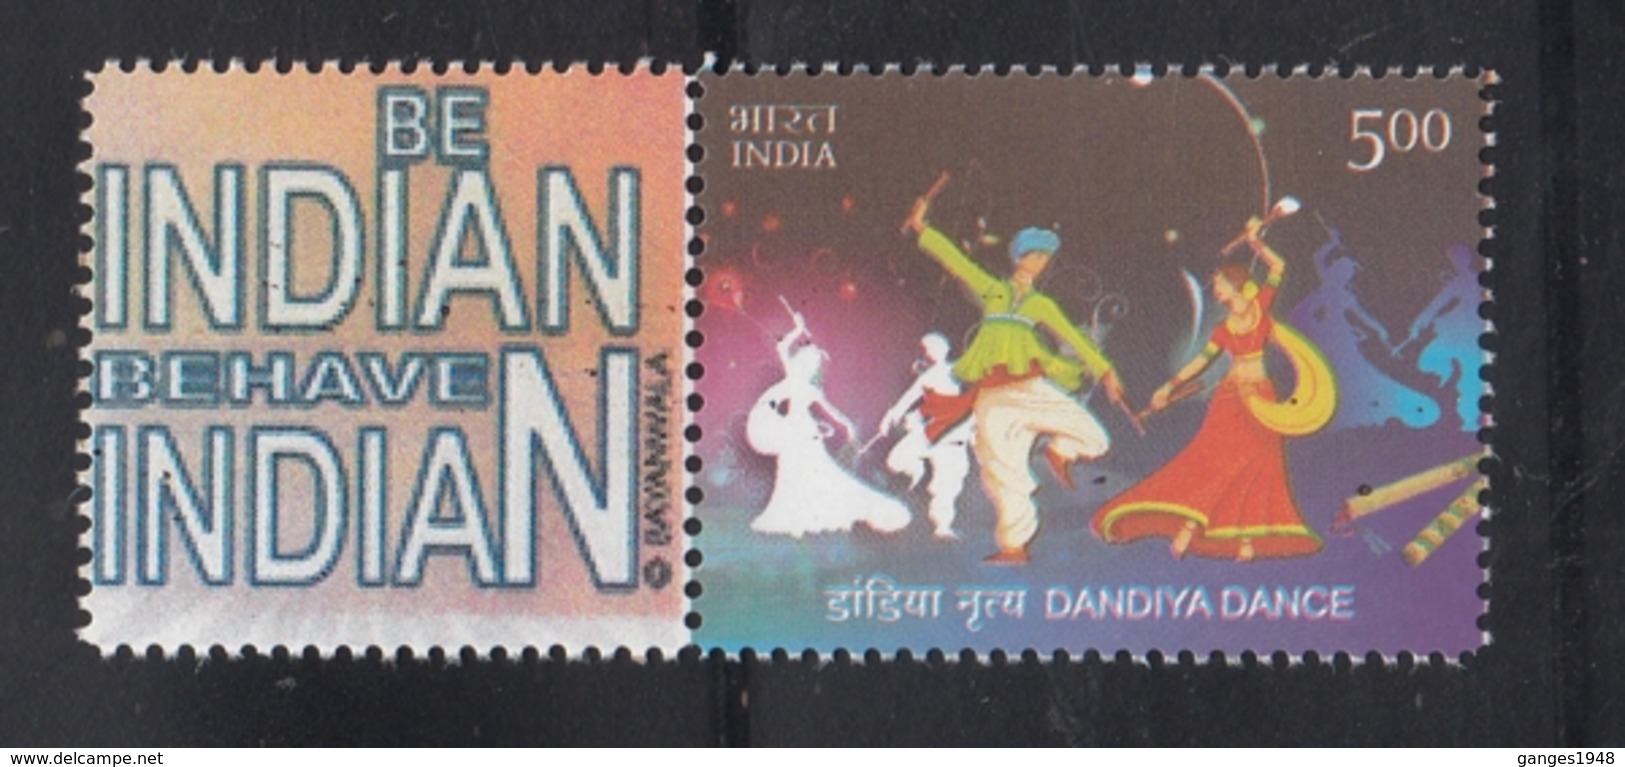 India  2016  Be Indian  Behave Indian  My Stamp  Dandiya Dance  Ahmedabad Issue  # 16867  D  Inde Indien - Neufs